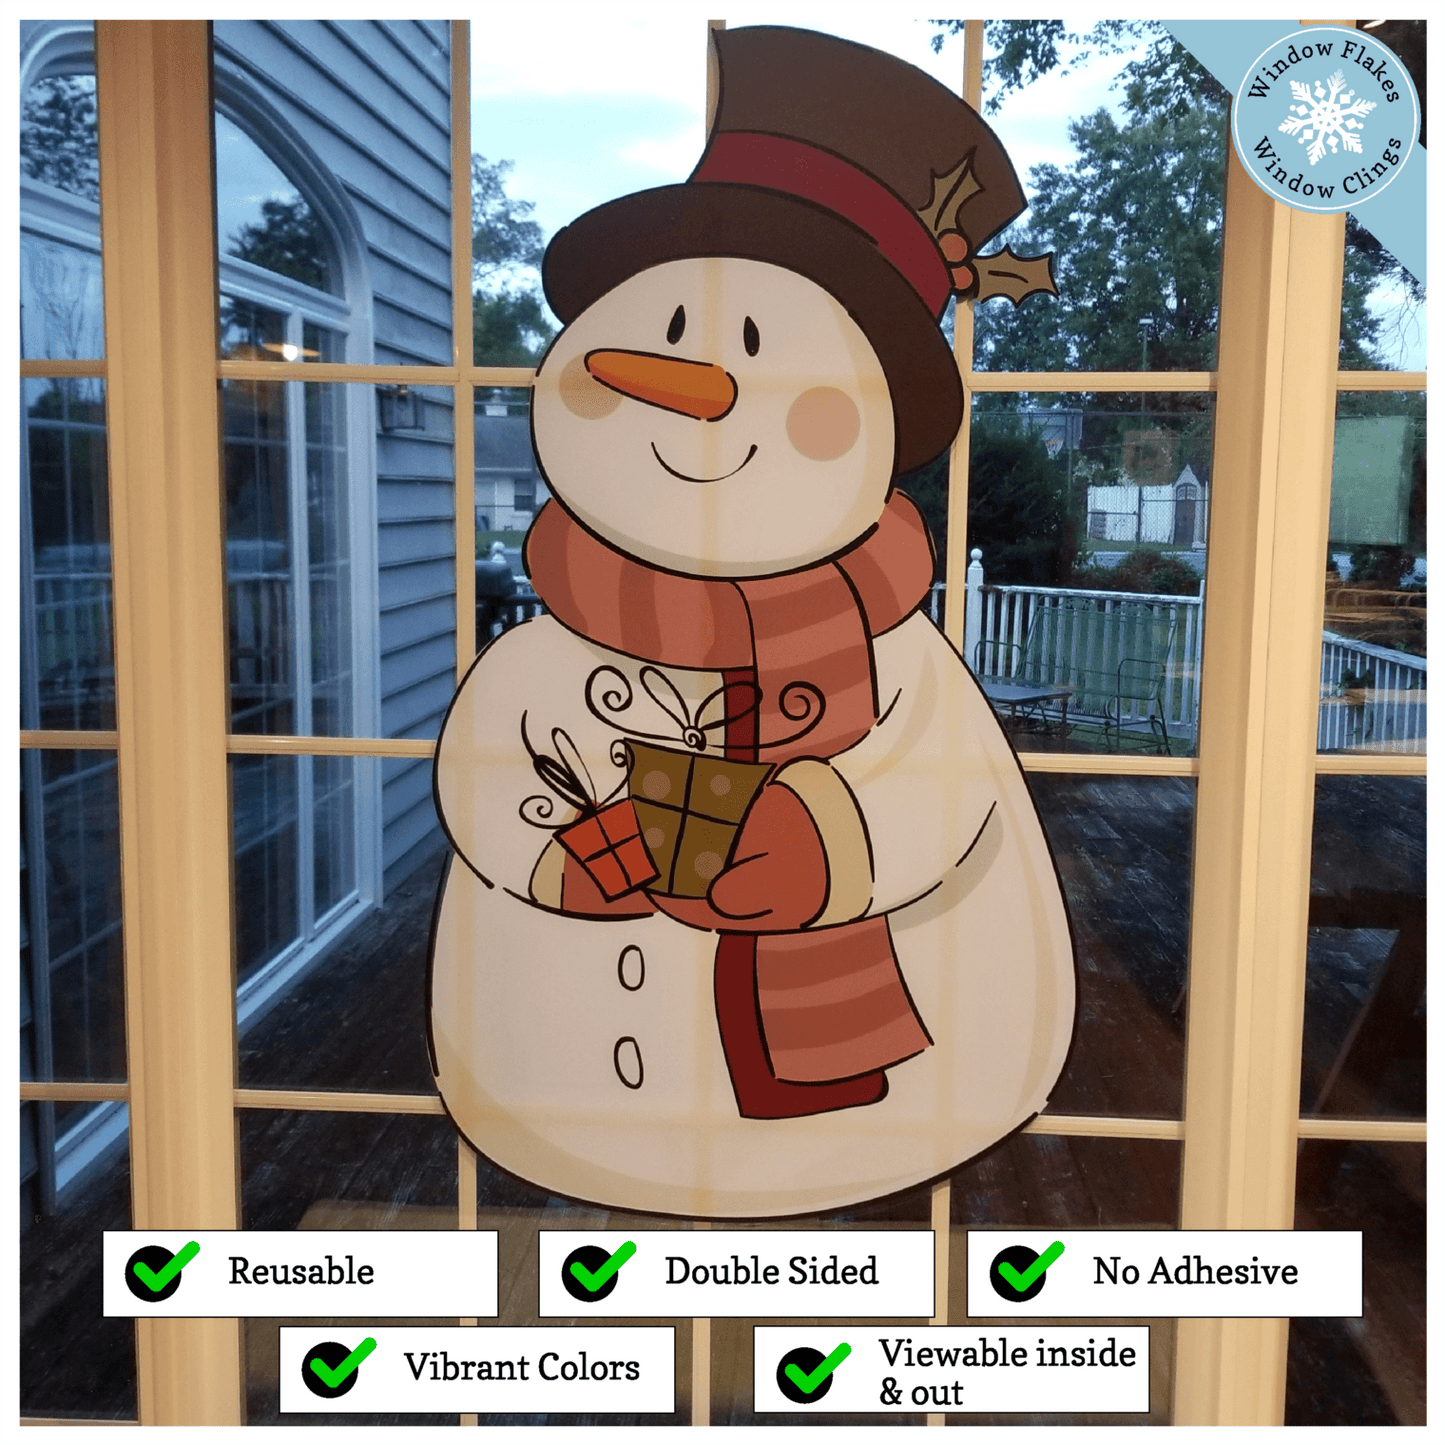 XL-LARGE VINTAGE SNOWMAN WINDOW CLINGS :: This enormous XL-LARGE Vintage Snowman Decoration window clings is a design marvel, let alone a decorative one. Each snowman is printed double sided using our innovative print process so they decorate both the view from inside and outside of your windows or glass doors.